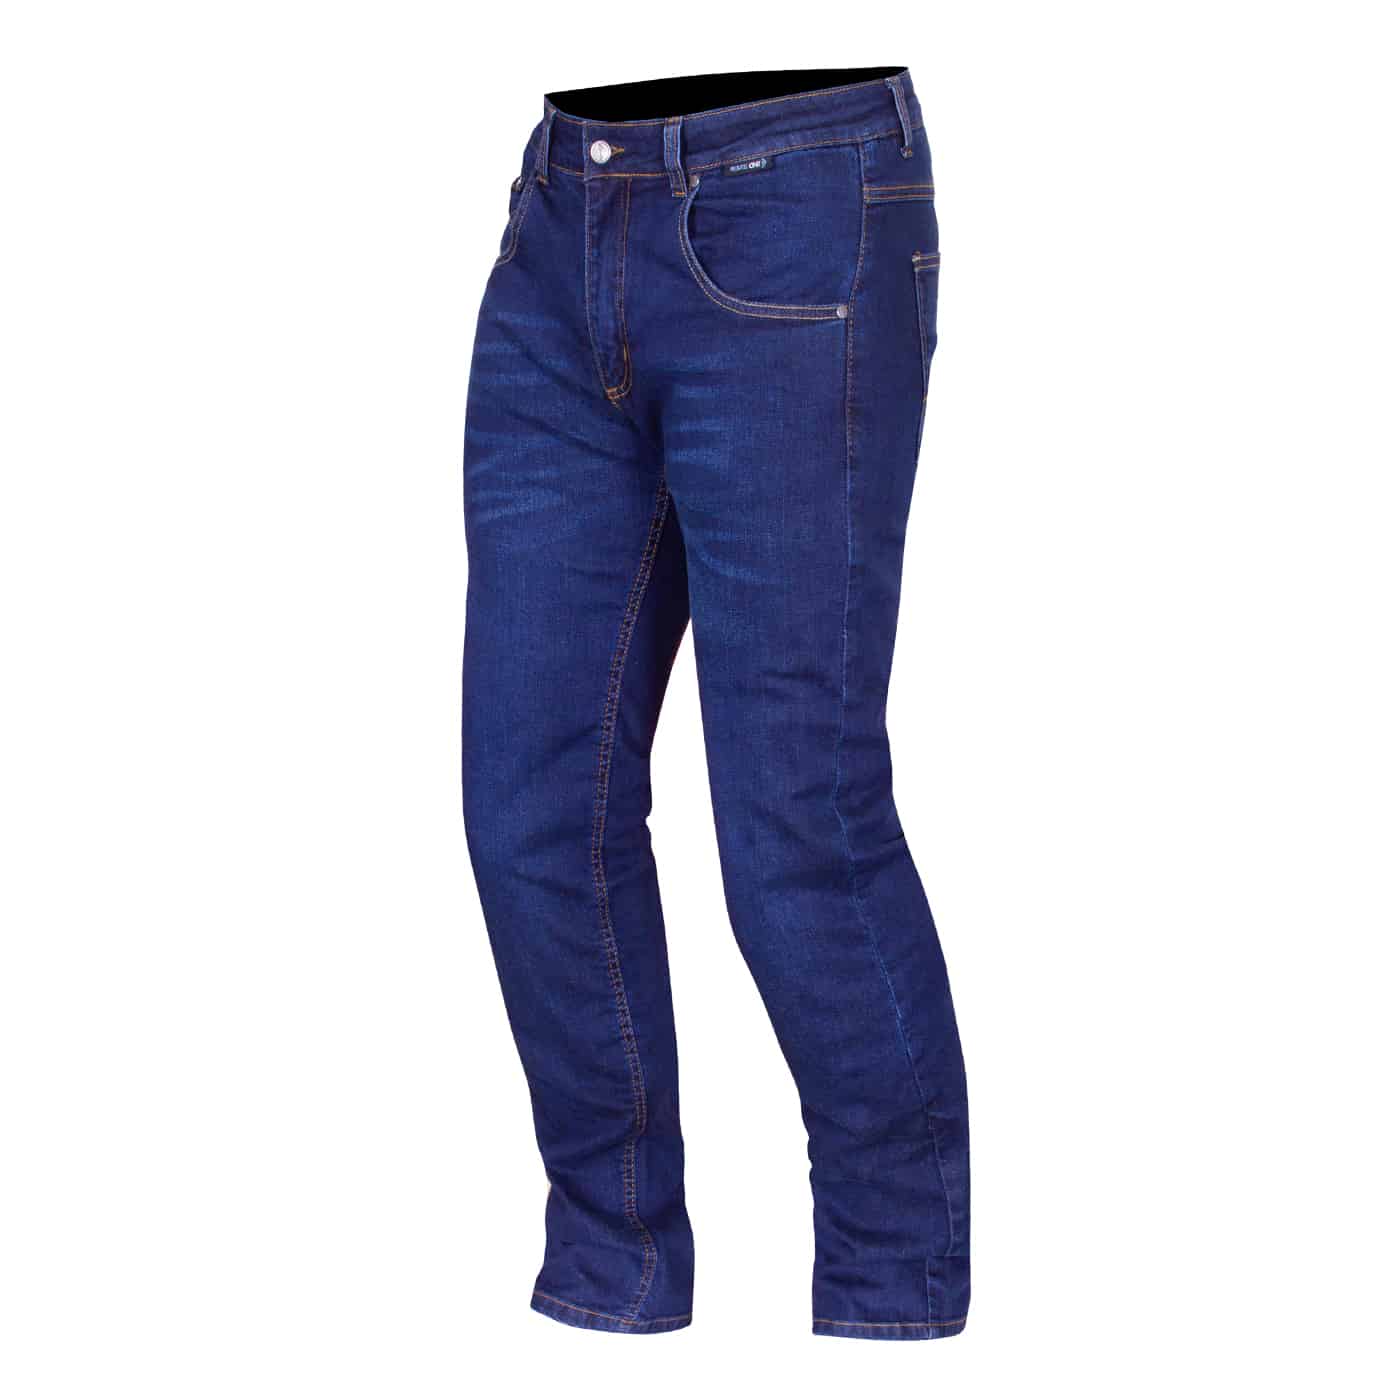 Route One Merlin Duke motorcycle riding jeans in blue